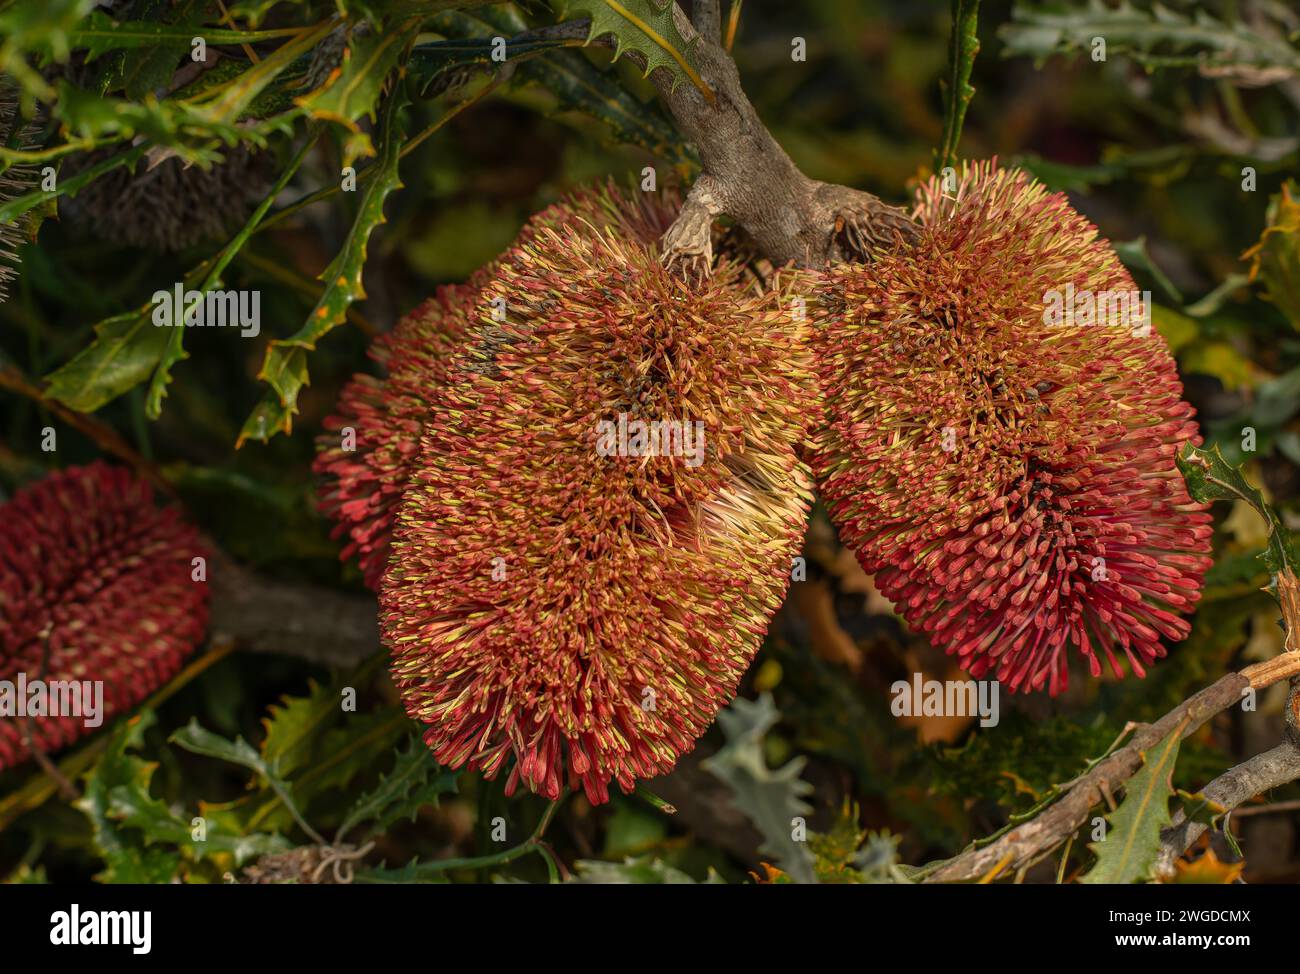 Caley's banksia, or Red lantern banksia, Banksia caleyi, in flower; from Western Australia. Stock Photo